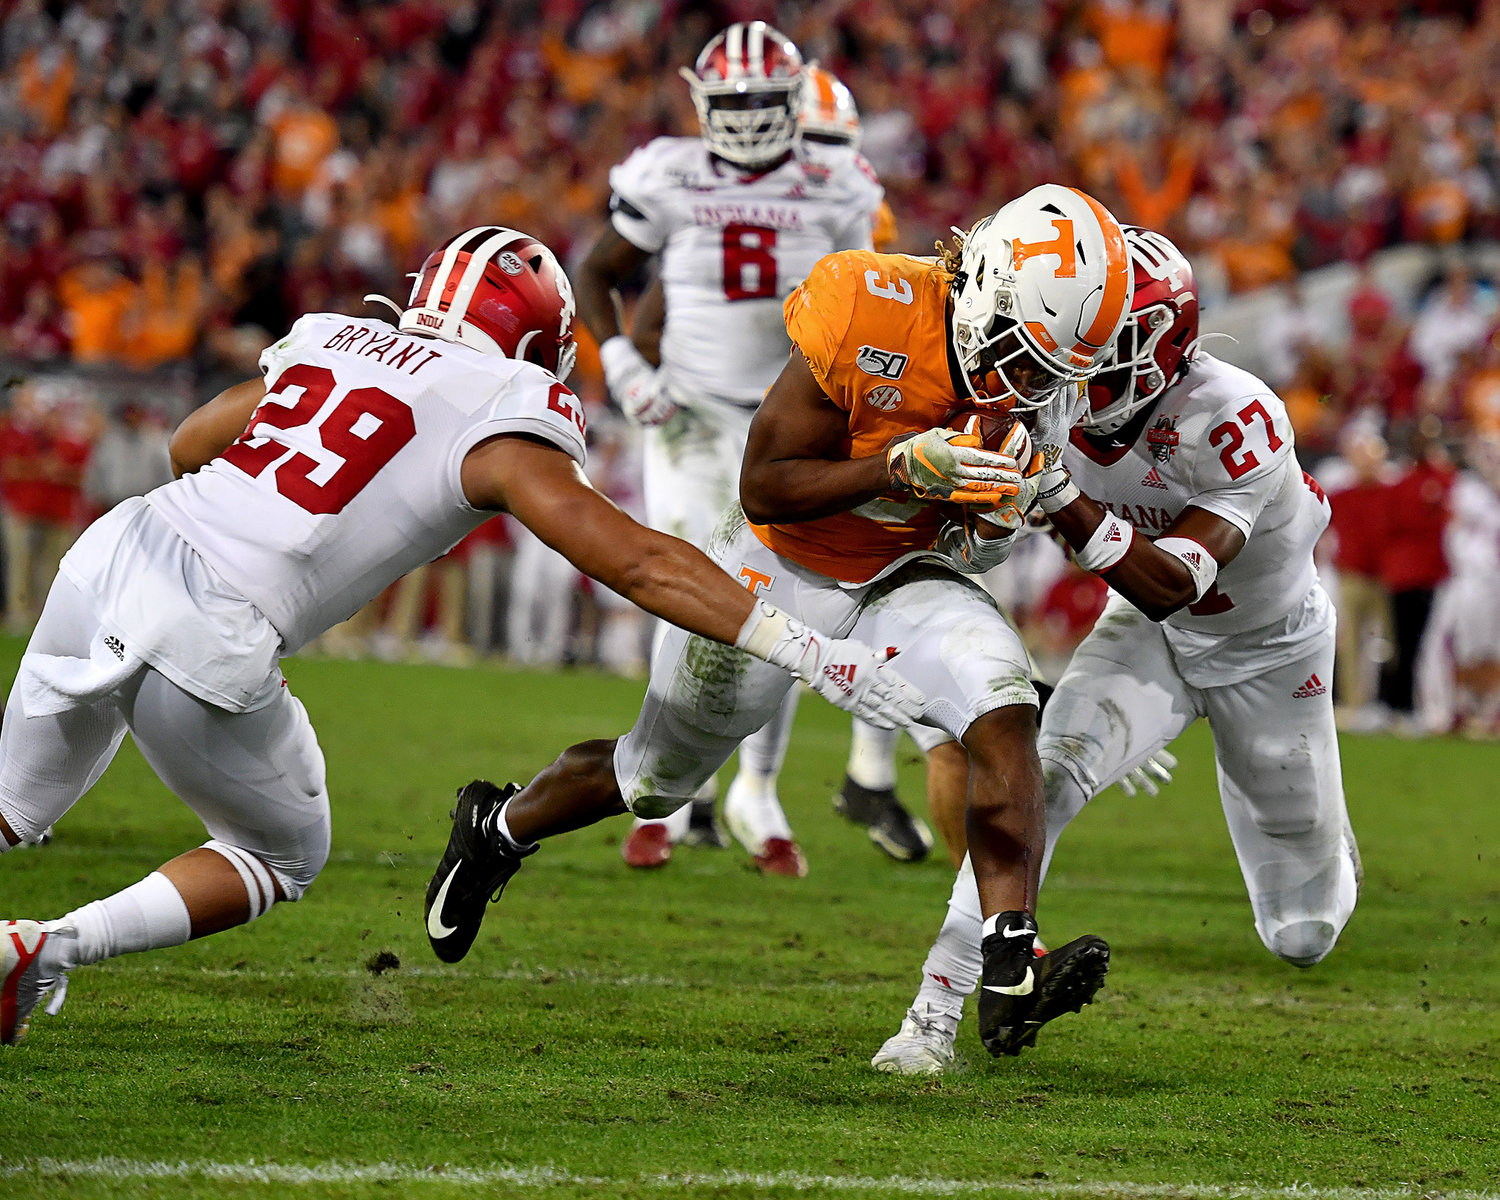 Tennessee Volunteers running back Eric Gray (3) on his way to the game-winning touchdown in the fourth quarter of the Gator Bowl NCAA football game against the Indiana Hoosiers Thursday, January 2, 2020, at TIAA Bank Field in Jacksonville, Fla.